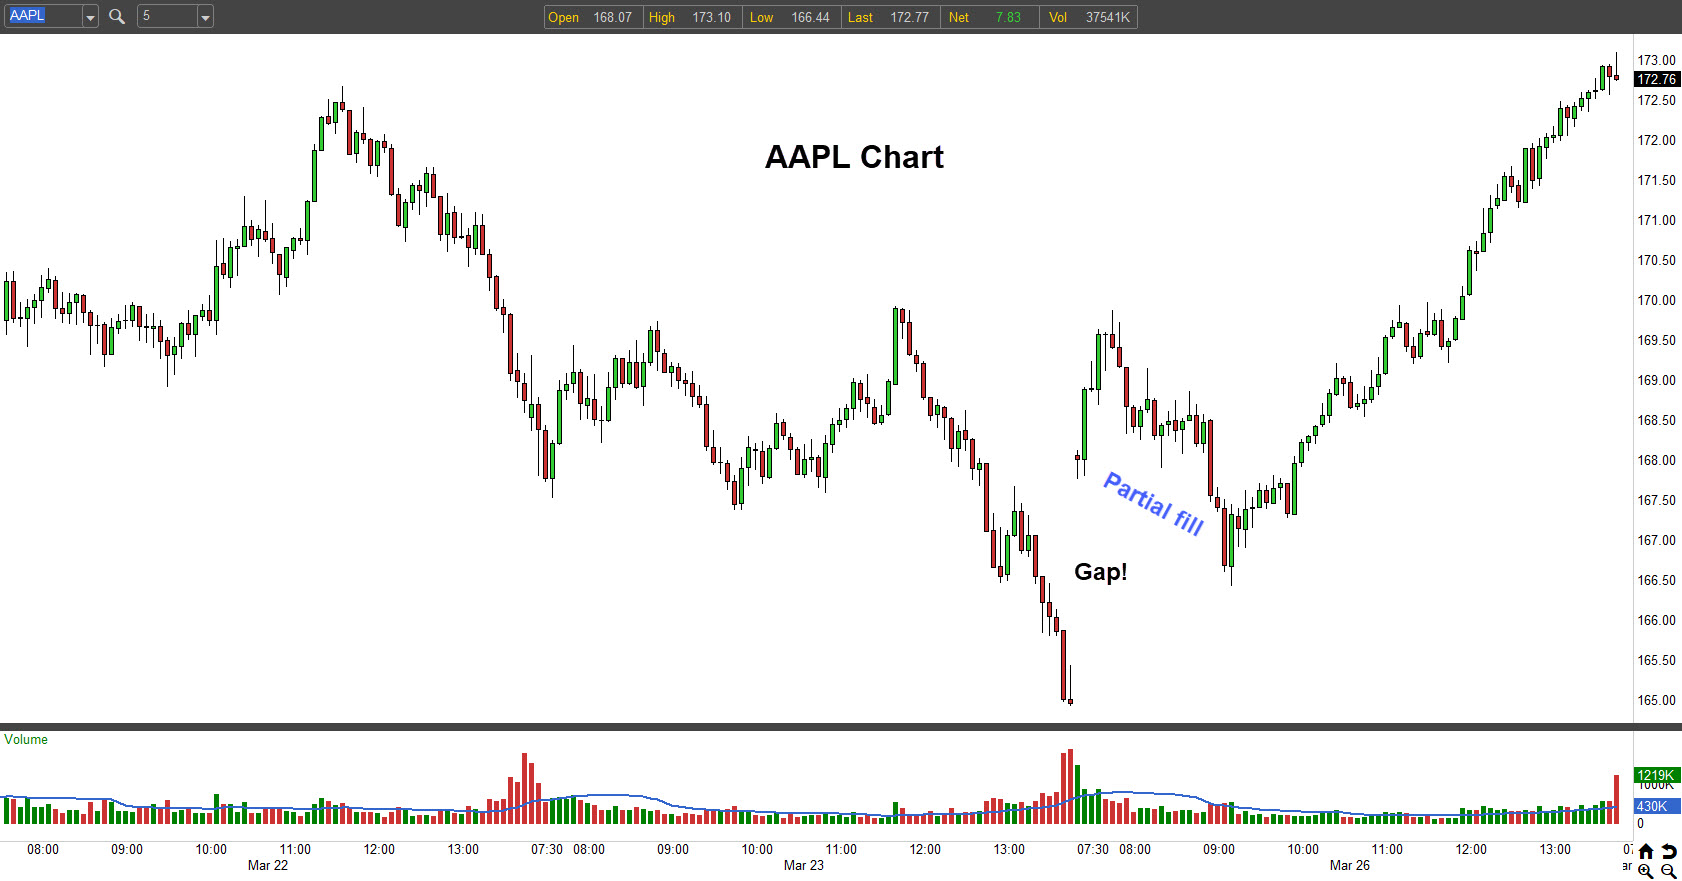 $AAPL chart